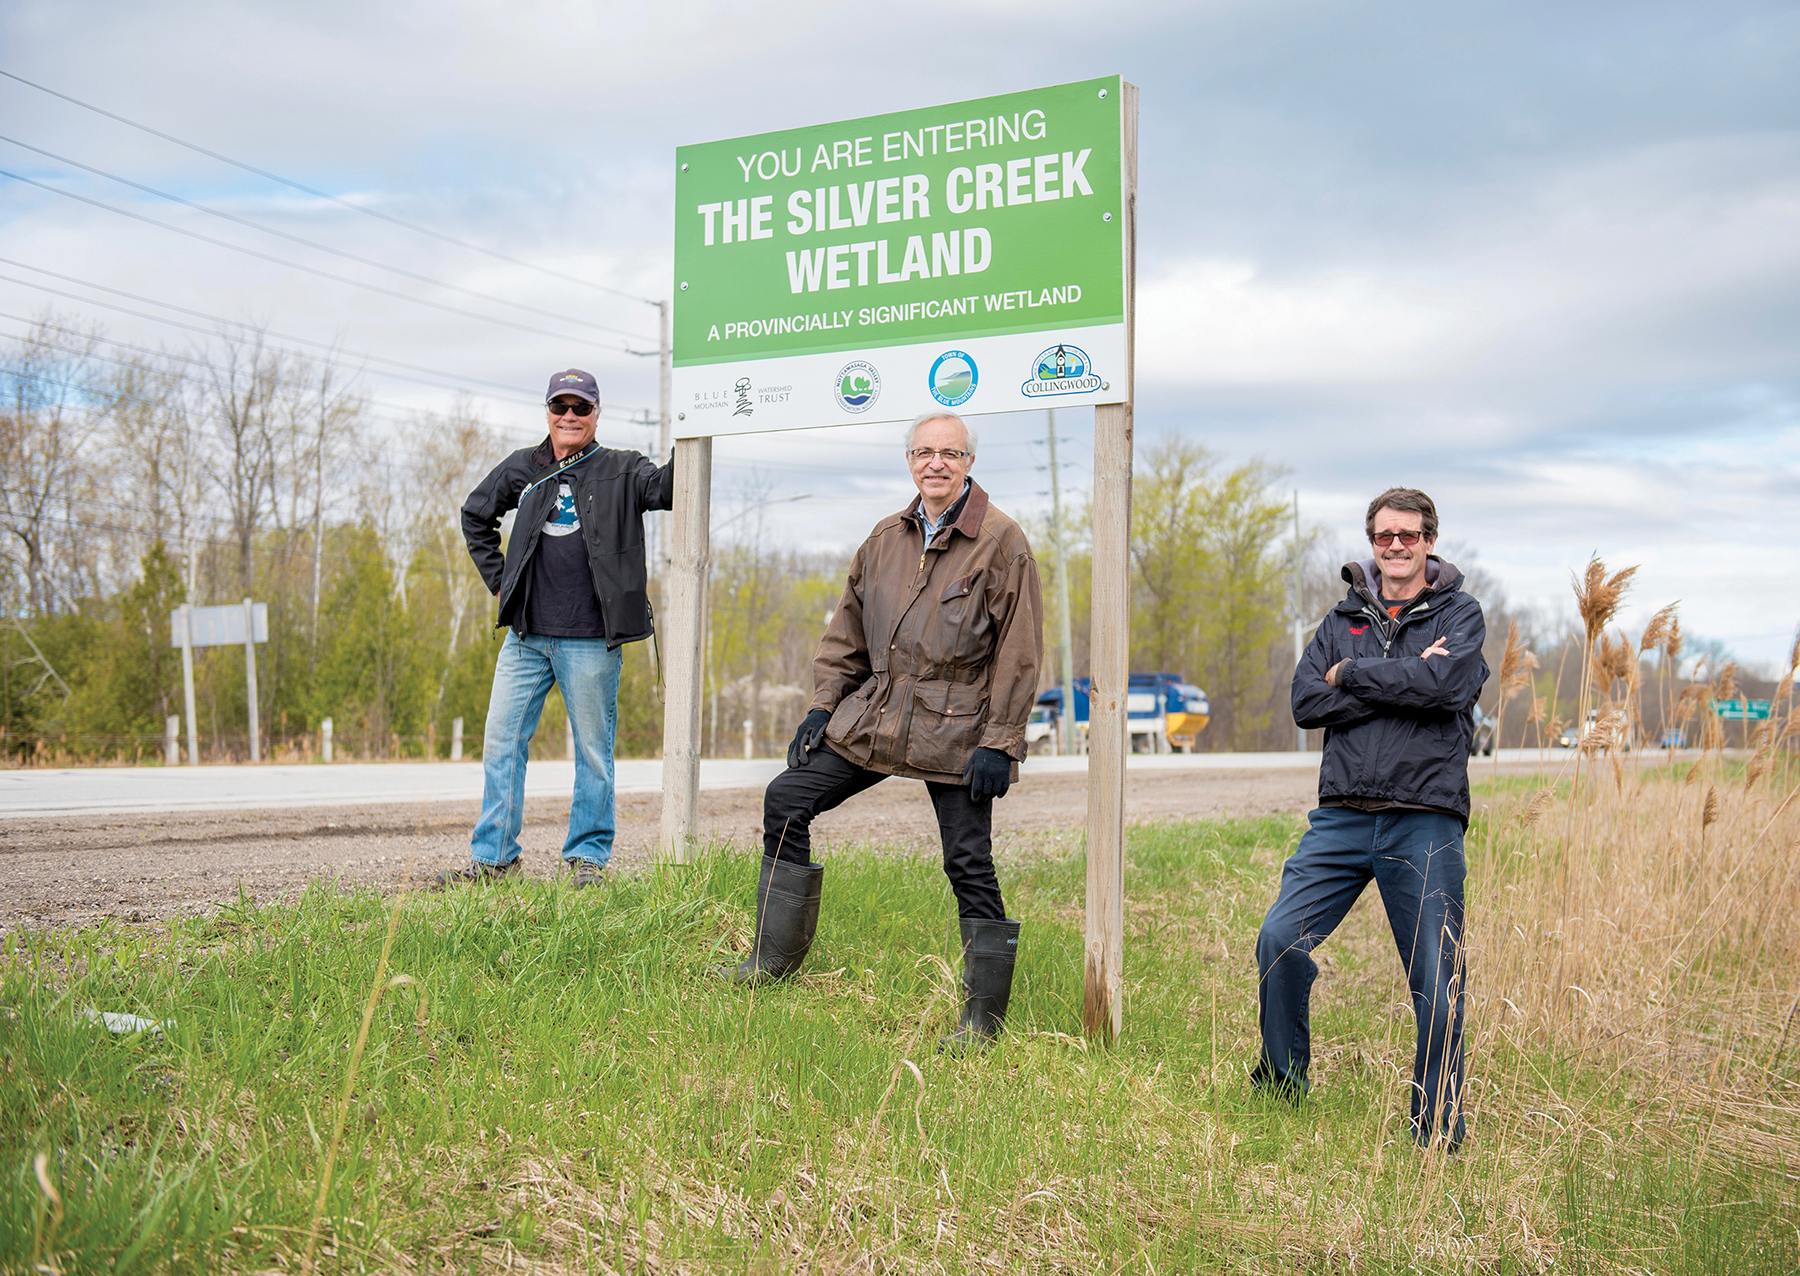 Members of the Save Silver Creek Wetlands community group (l-r) Duncan Bristow, Paul Neate and Chris Mifflin pose near a sign on Highway 26 marking the entrance to the wetland.